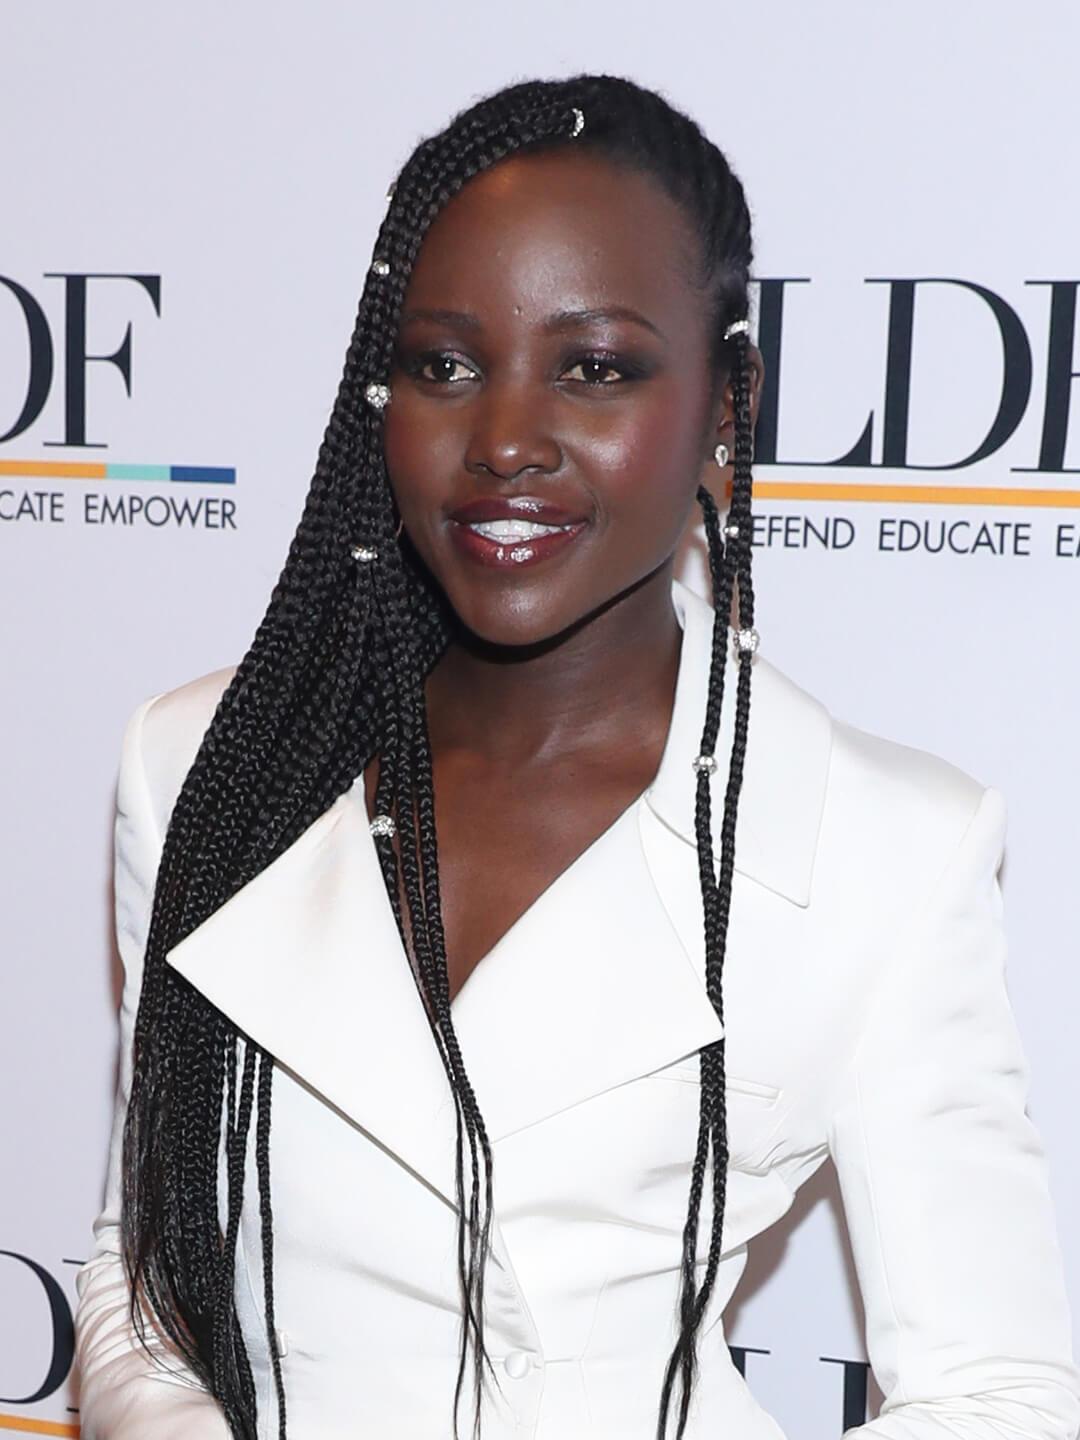 Lupita Nyong'o in a white suit rocking a long, bejeweled goddess braids hairstyle